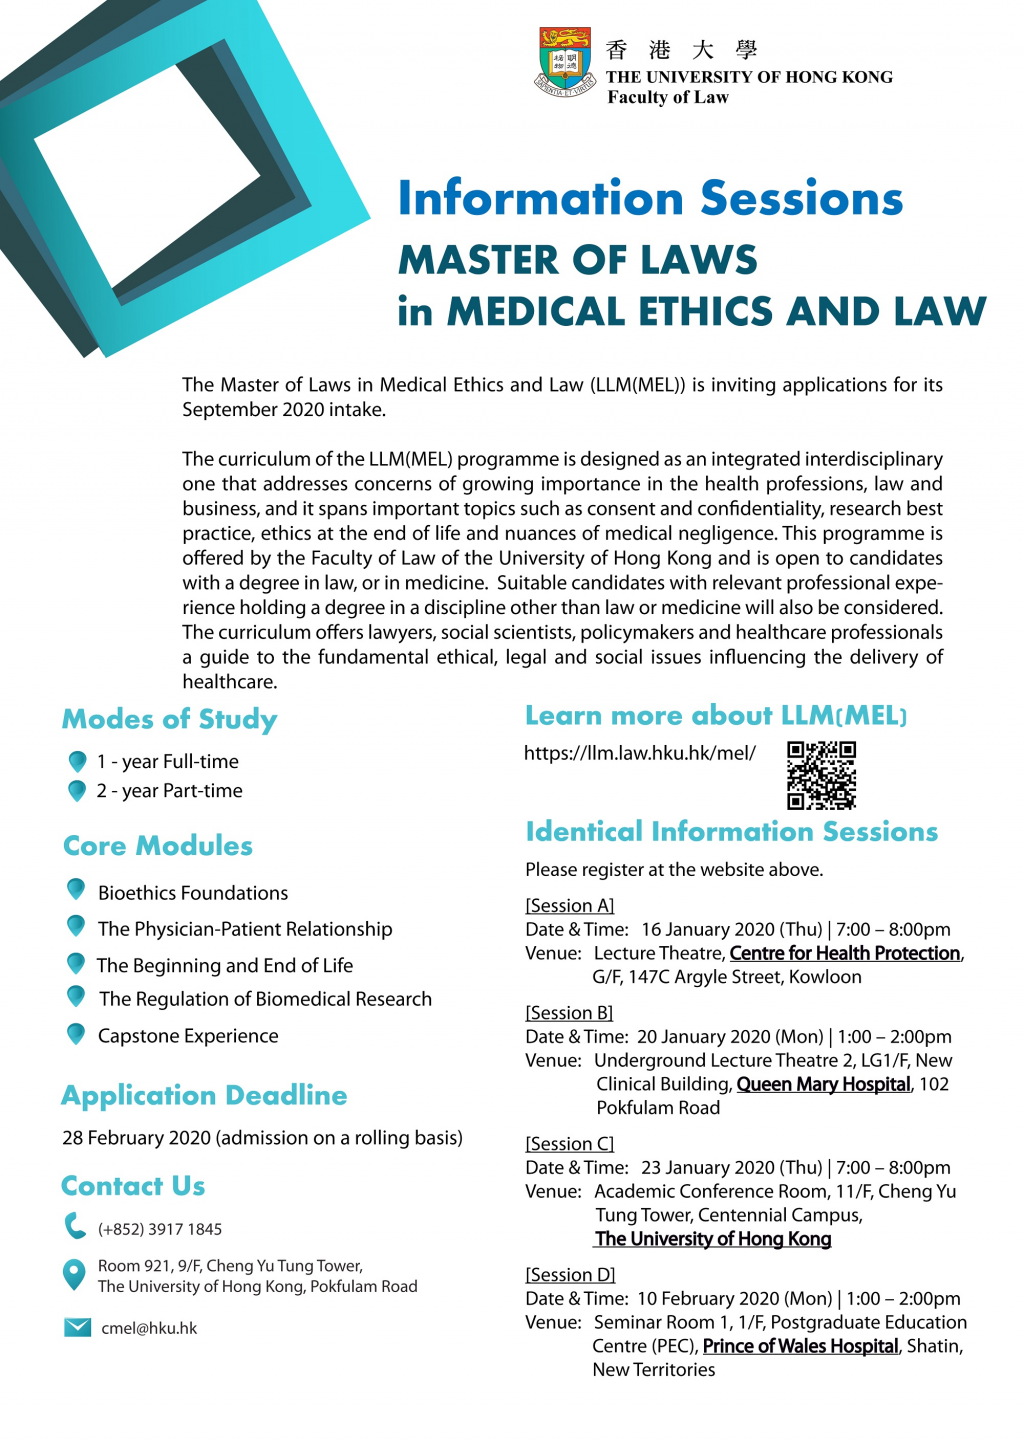 Master of Laws in Medical Ethics and Law - Info Sessions